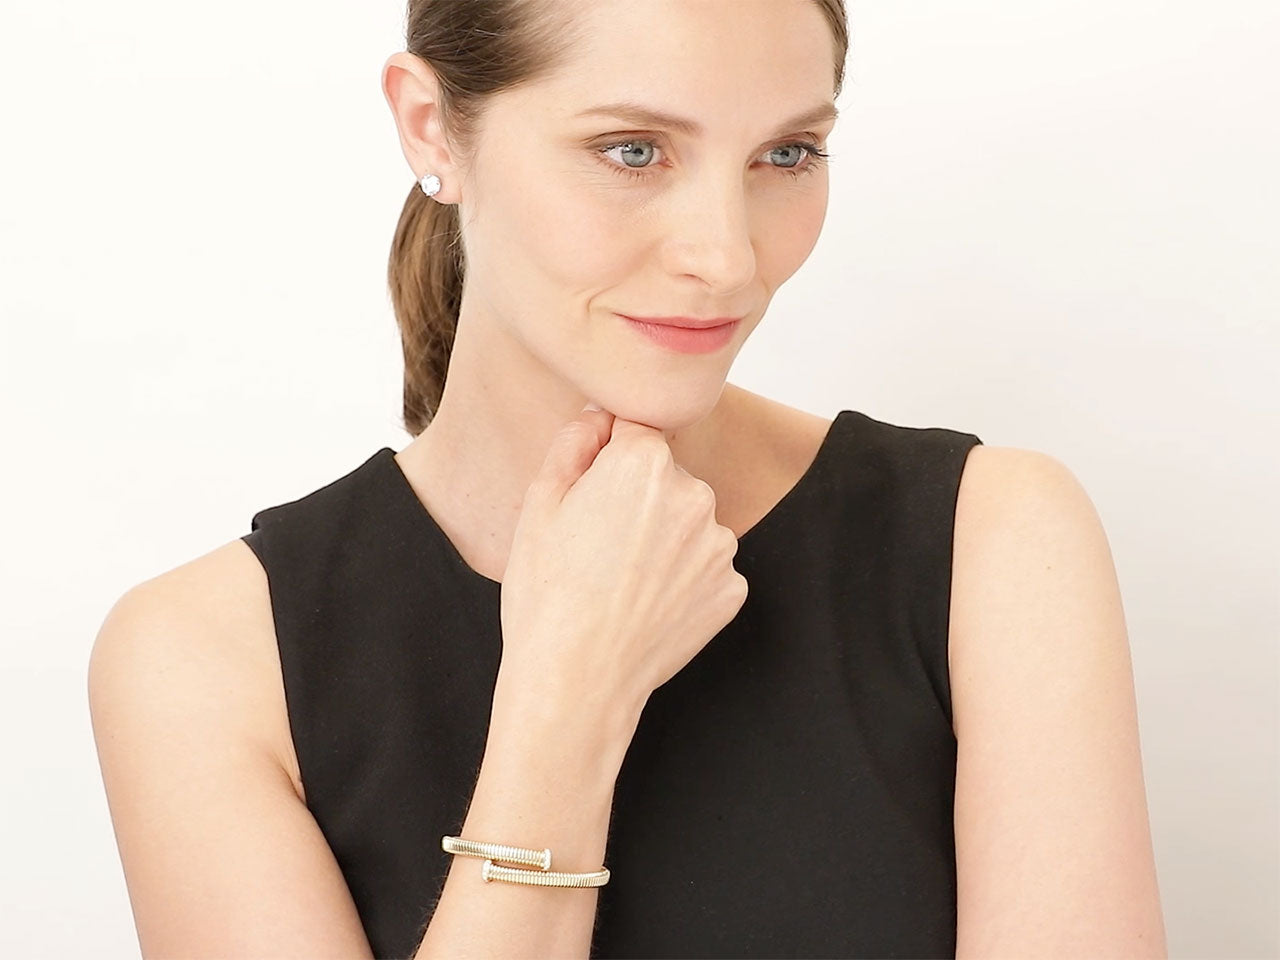 Tubogas Bypass Bracelet with Nail Head Terminals in 18K Yellow Gold, by Beladora